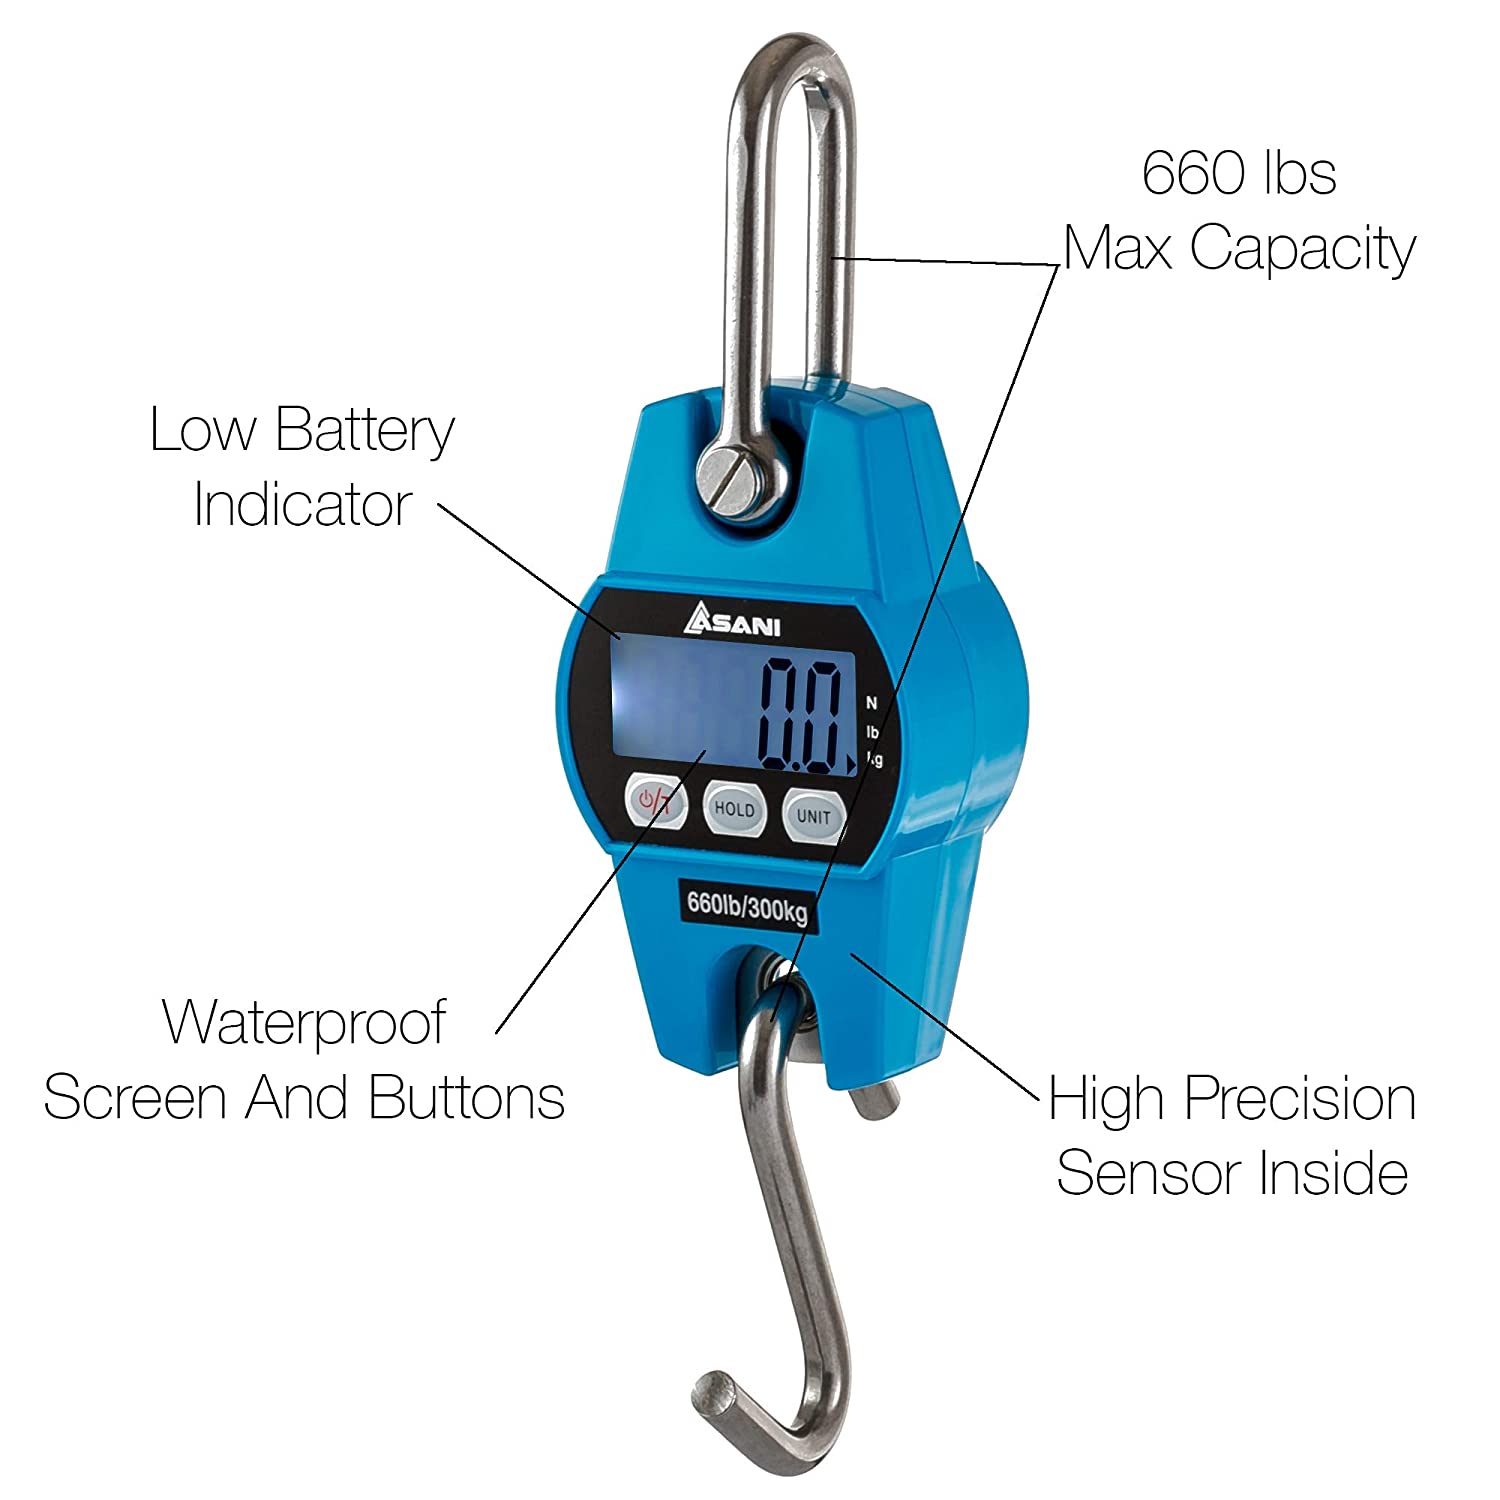 300kg 660 lb Mini Crane Scale Portable Industrial Digital Electronic Stainless Heavy Duty Digital Hanging Scales Tools